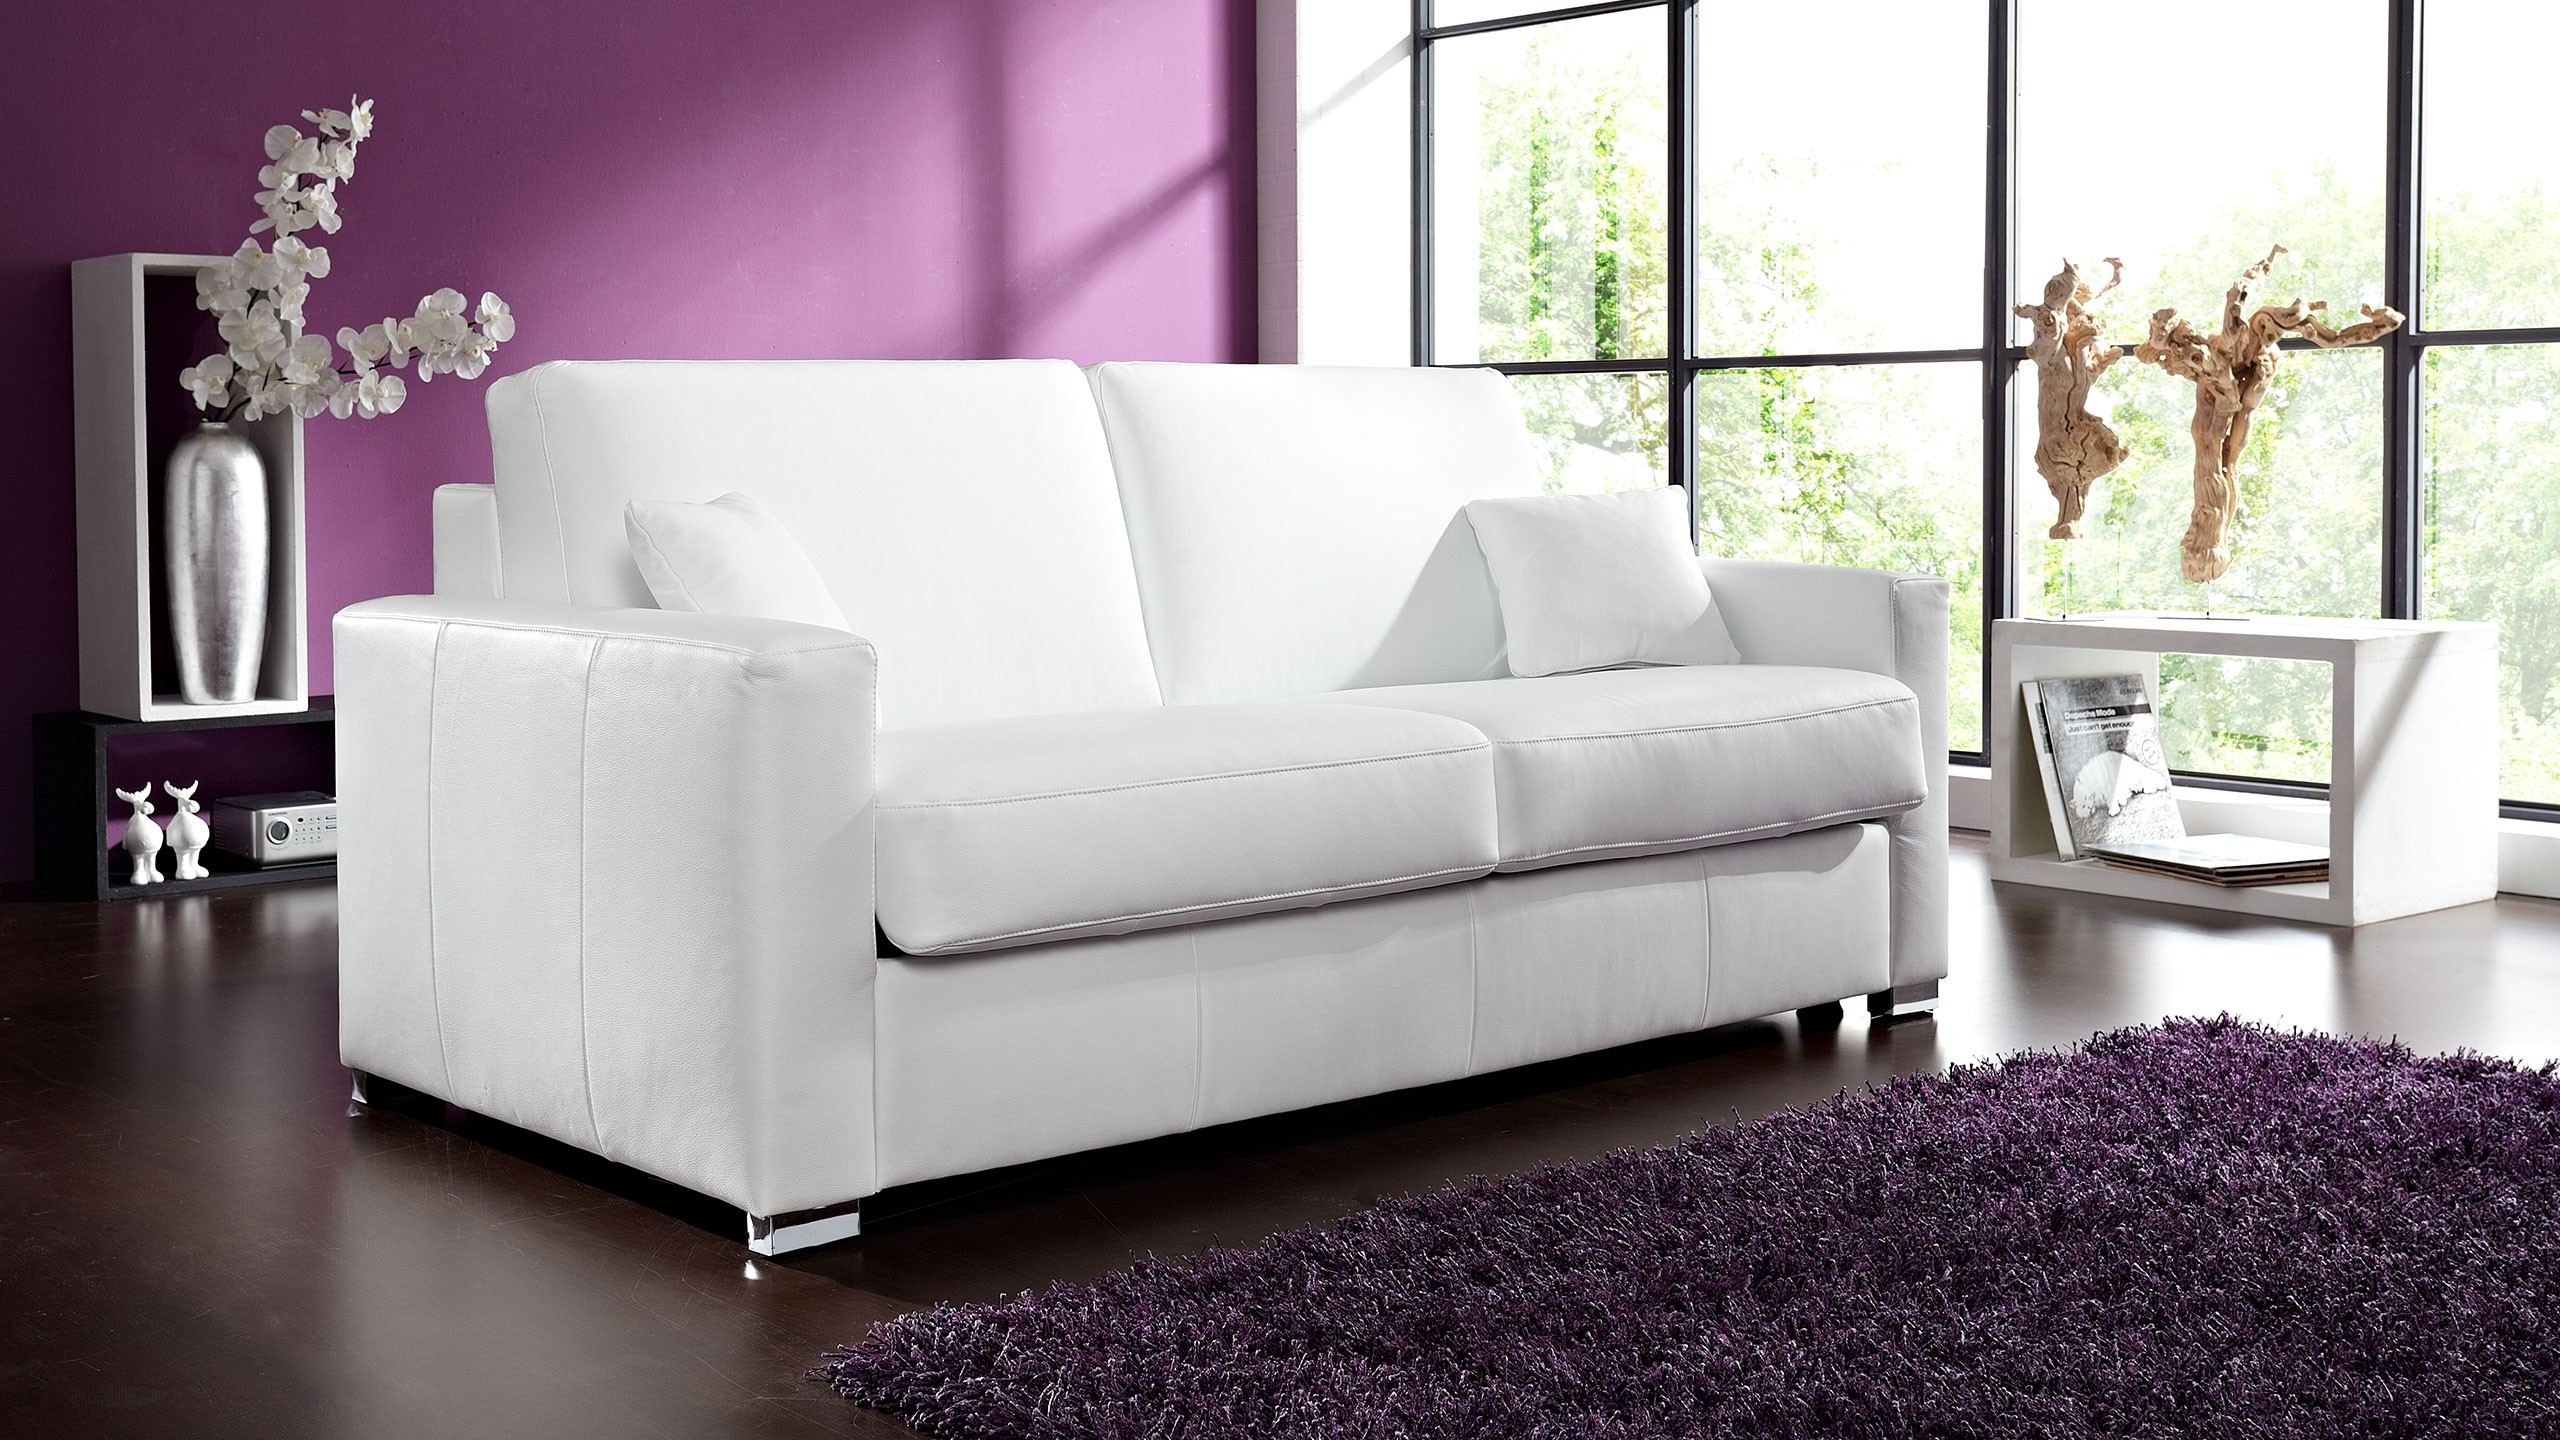 Coco Schlafcouch Leder Weiss